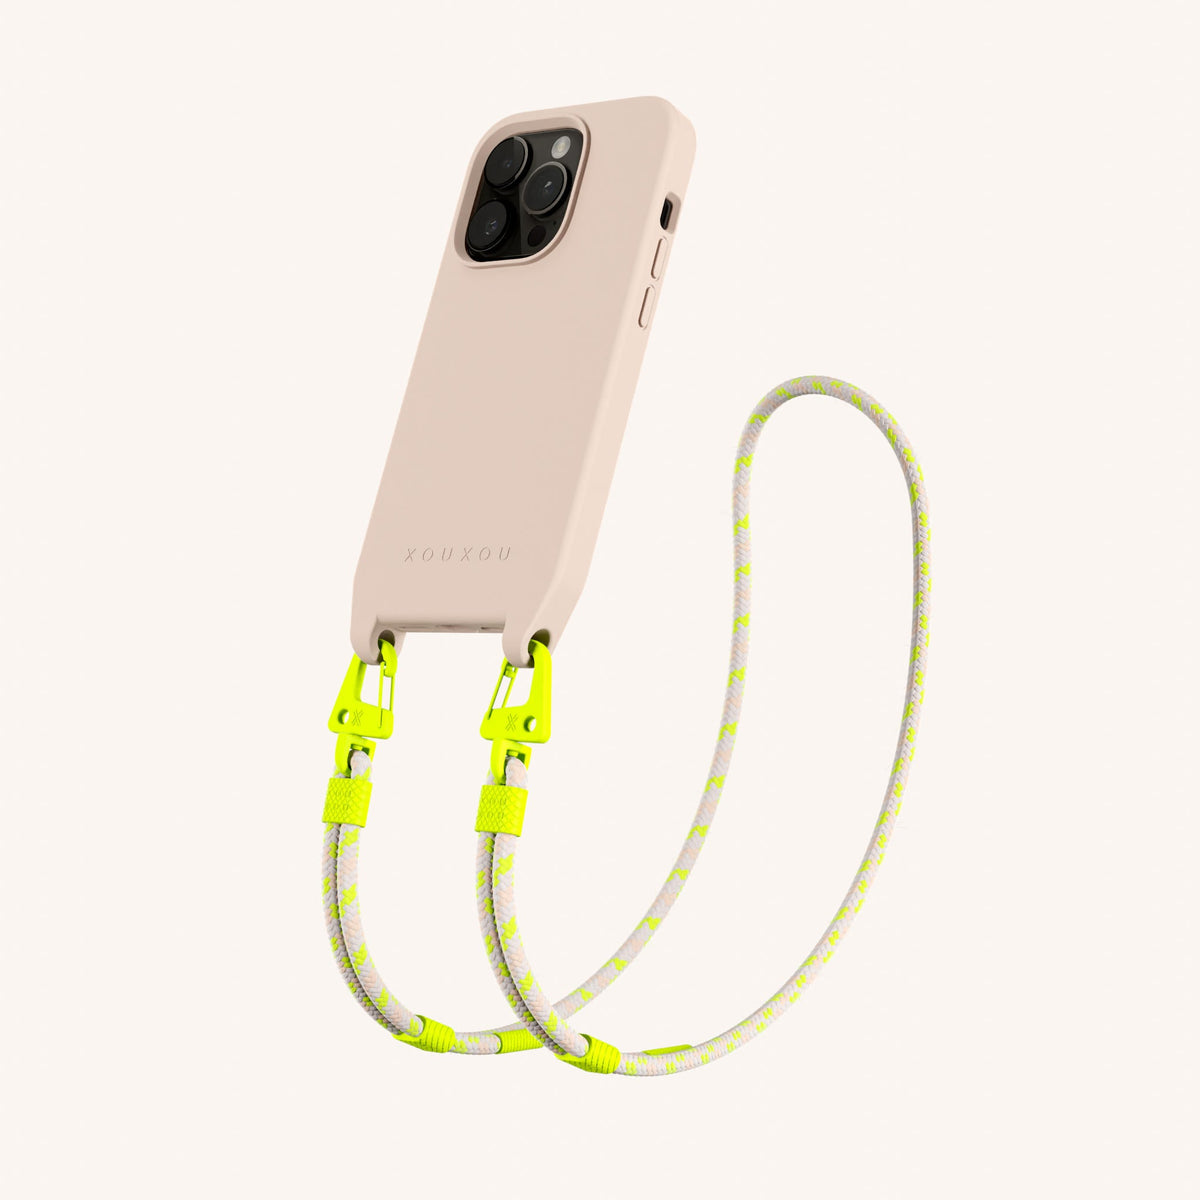 Phone Necklace with Carabiner Rope for iPhone 14 Pro without MagSafe in Powder Pink + Neon Camouflage Perspective View | XOUXOU #phone model_iphone 14 pro